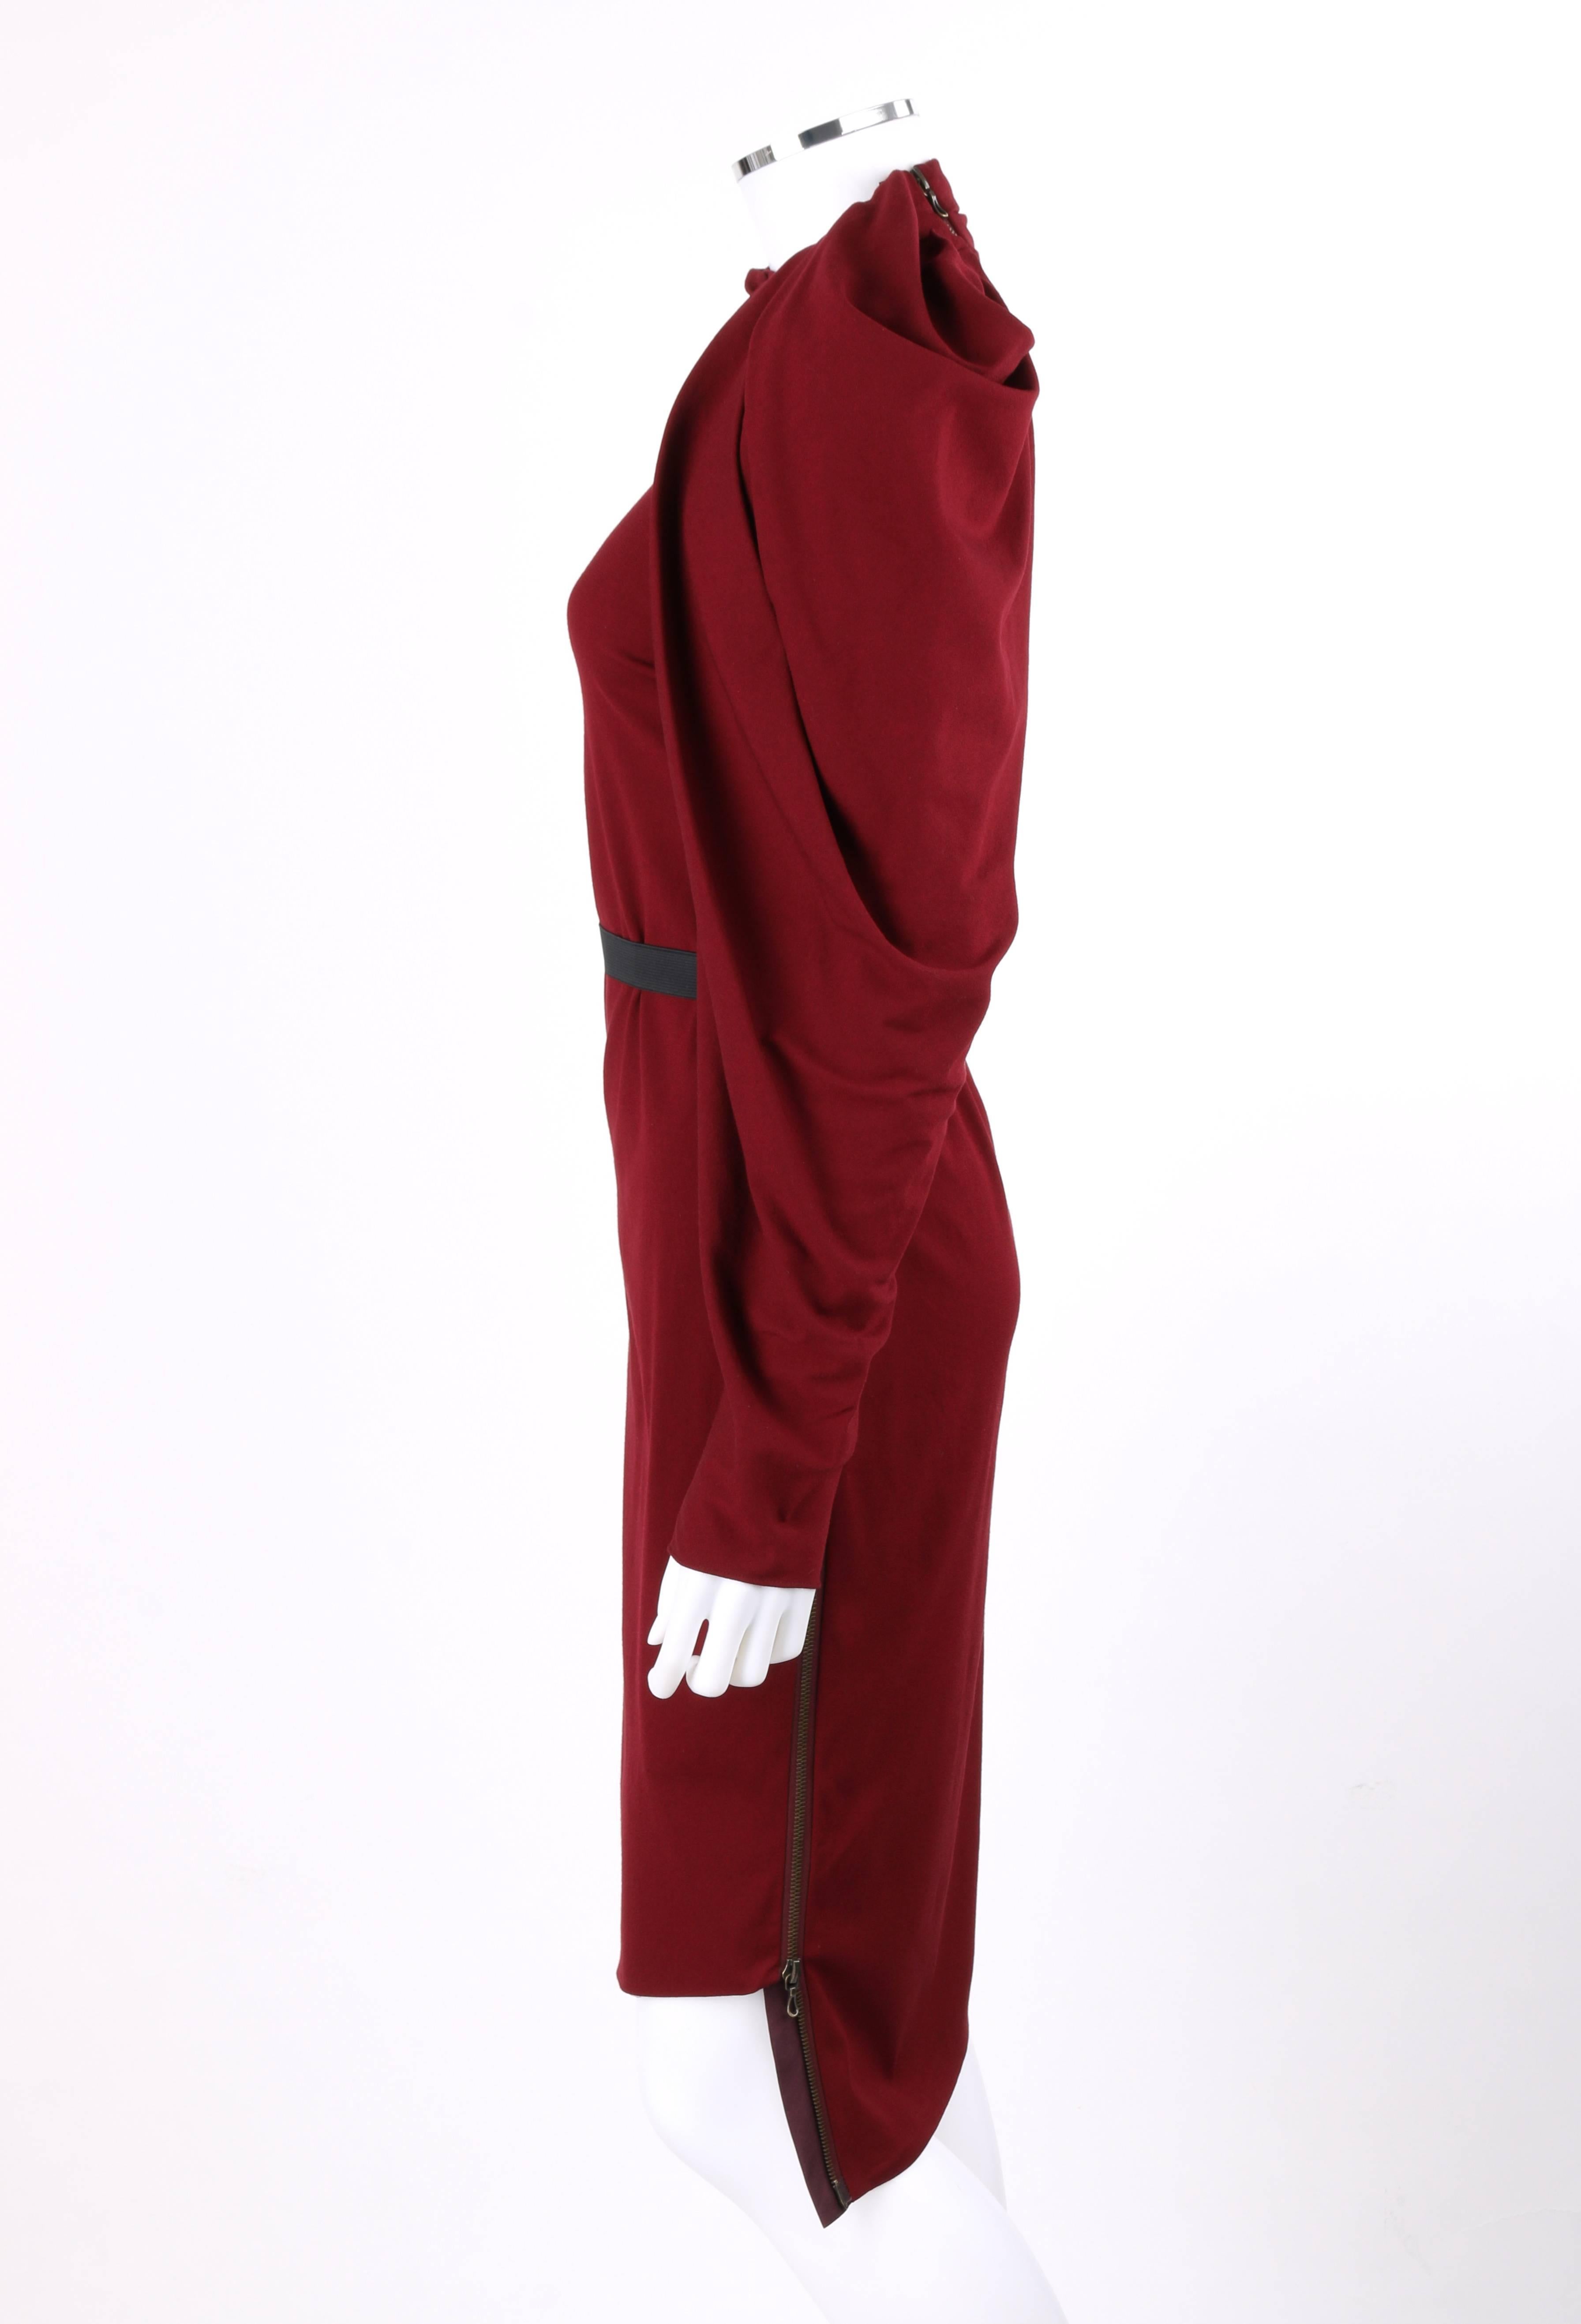 LANVIN A/W 2011 Burgundy Red Wool Asymmetrical Draped Sleeve Cocktail Dress In Good Condition In Thiensville, WI